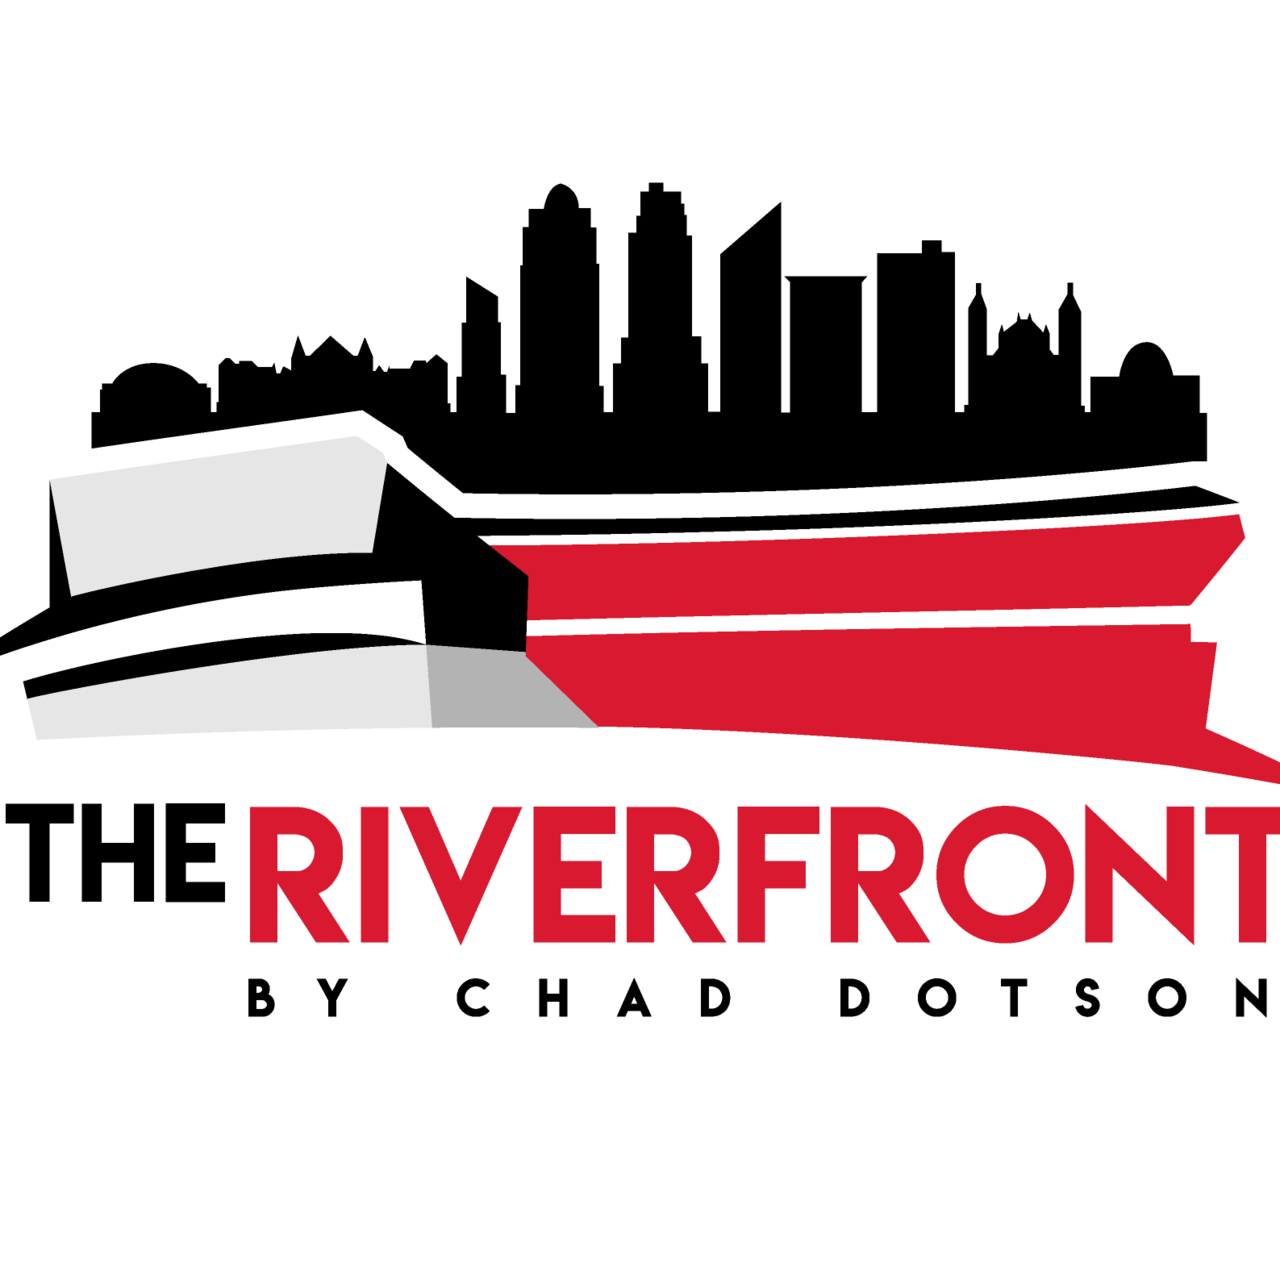 Artwork for The Riverfront by Chad Dotson